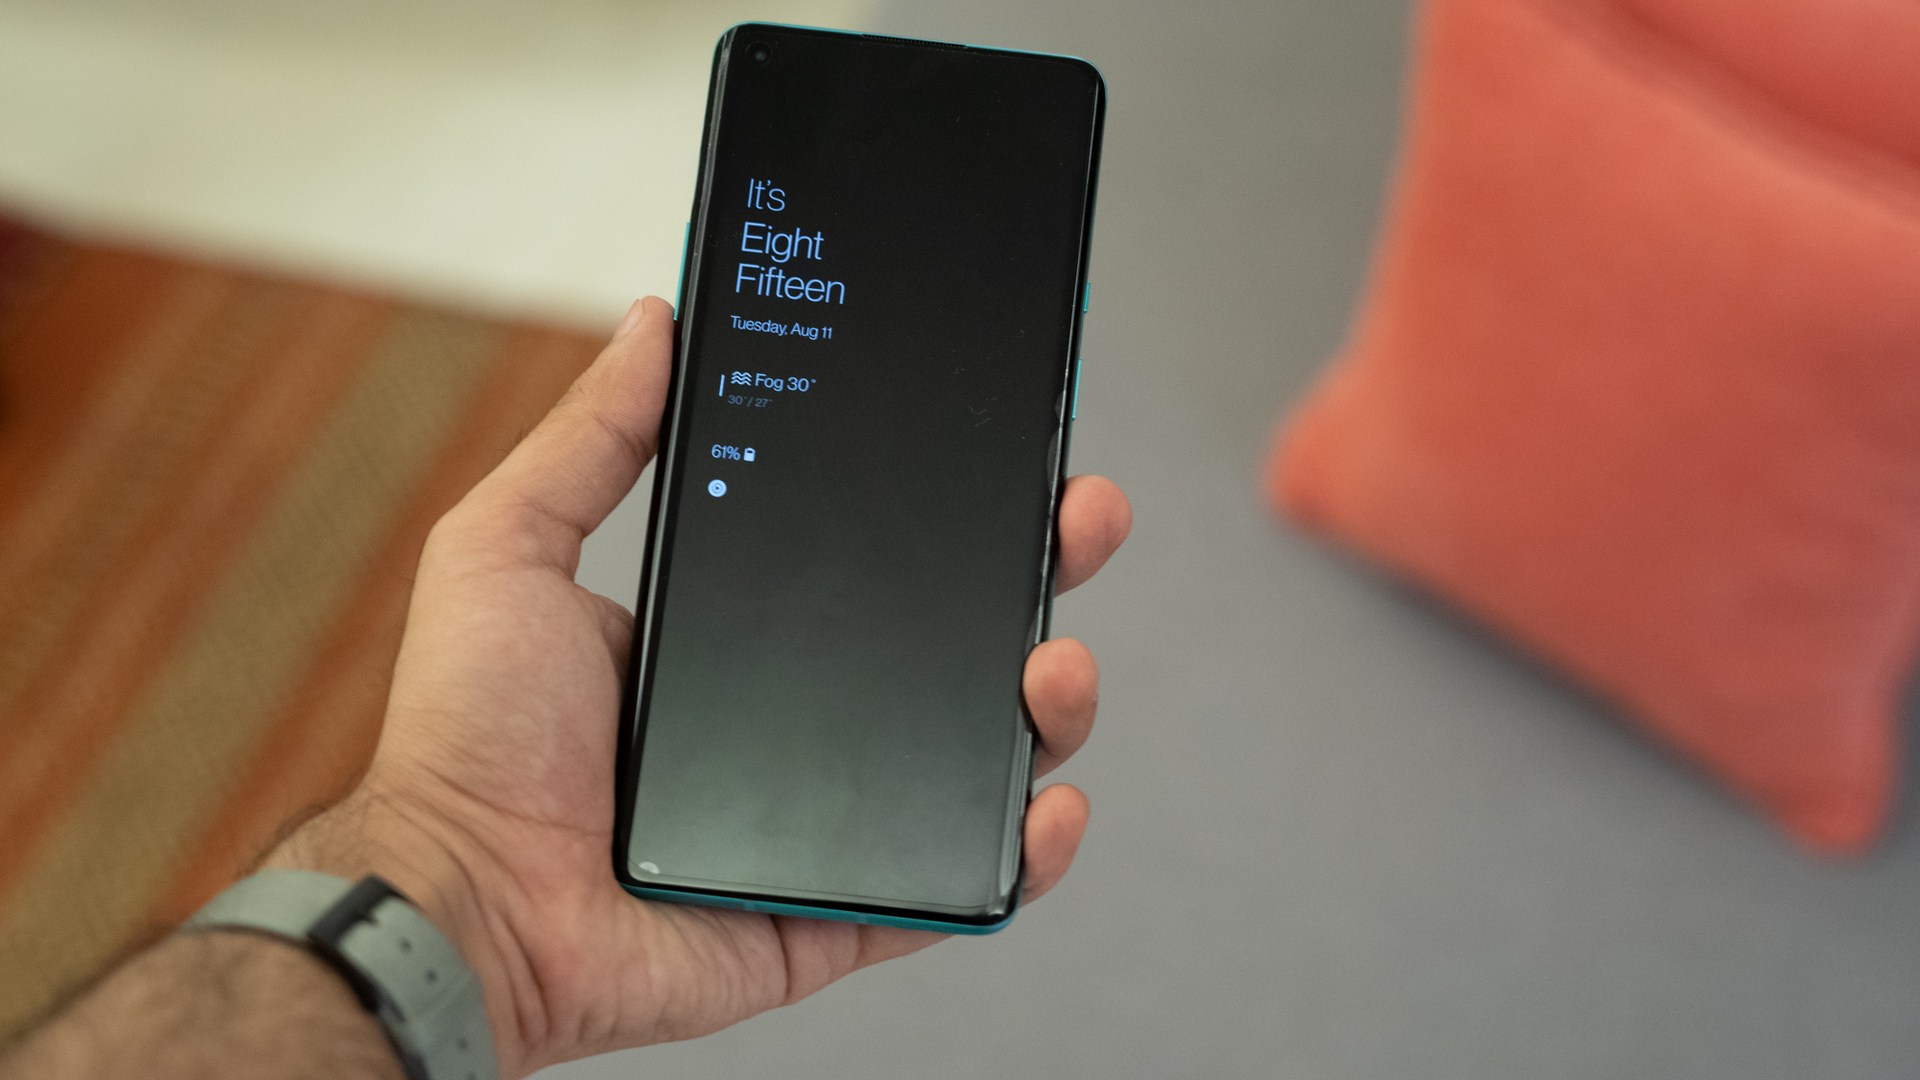 OnePlus 8 Pro Android 11 dev preview always on display in hand